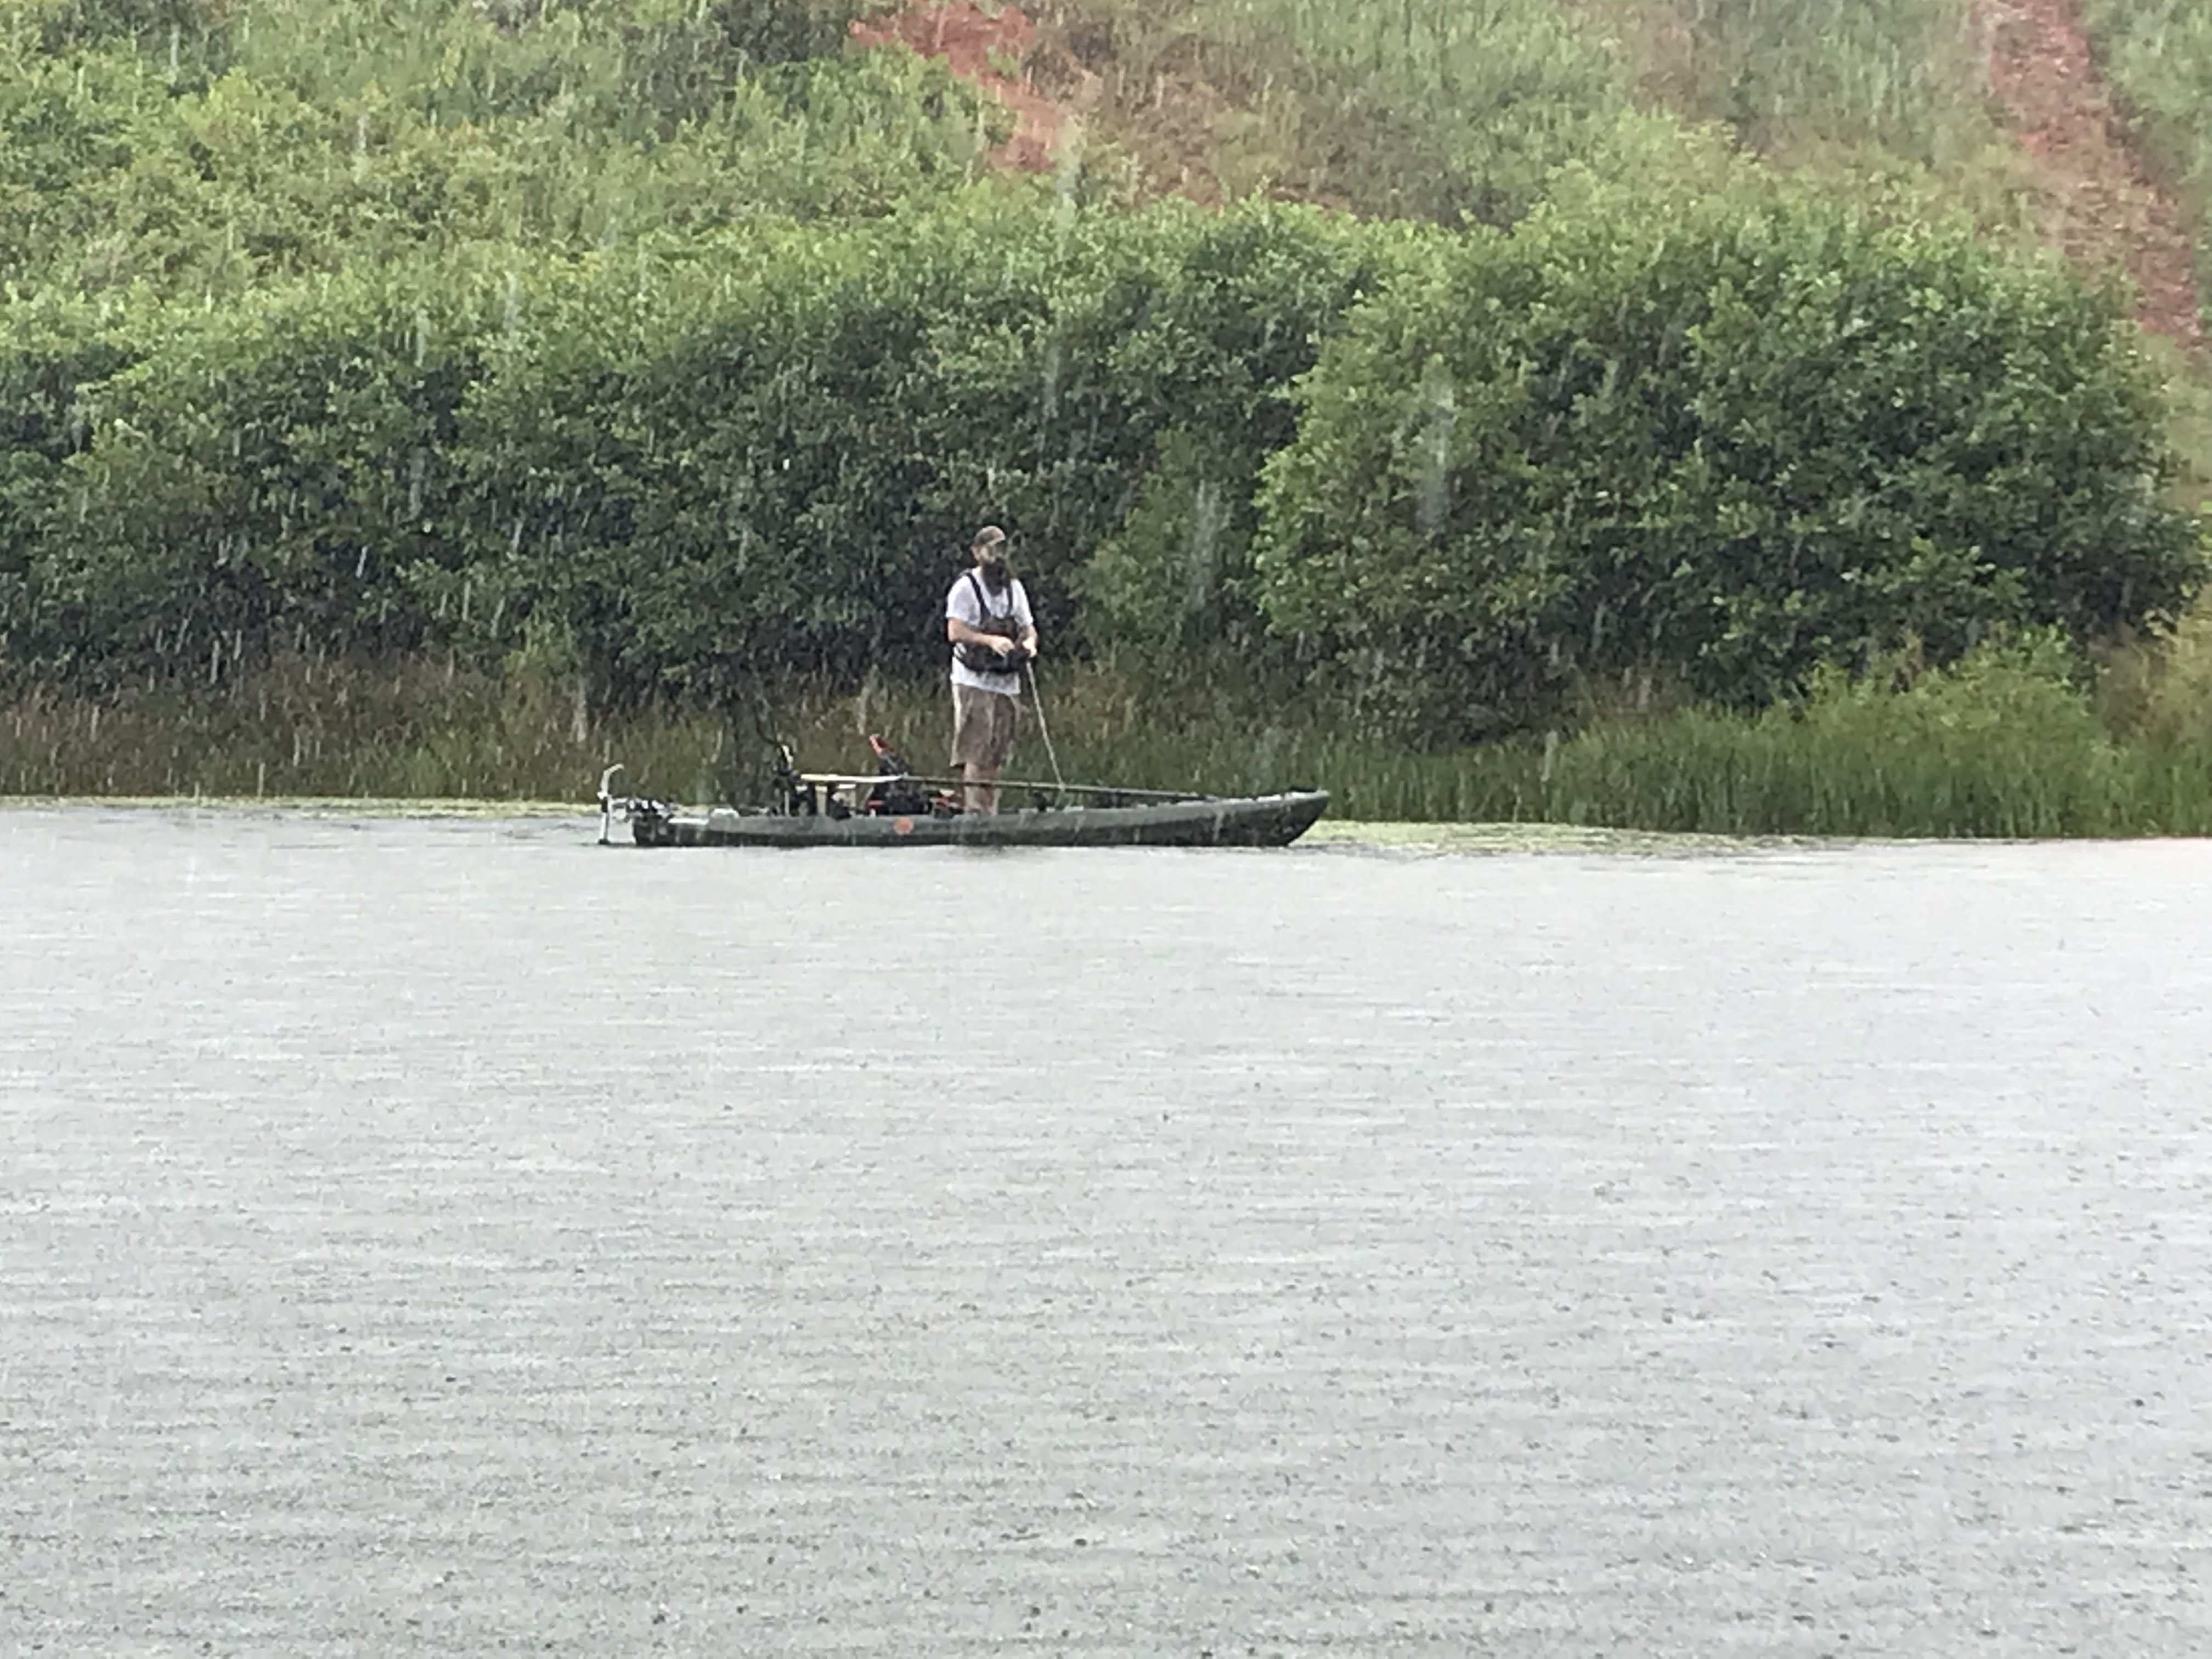 Scott Beutjer fishing in the rain from his Crescent Kayak